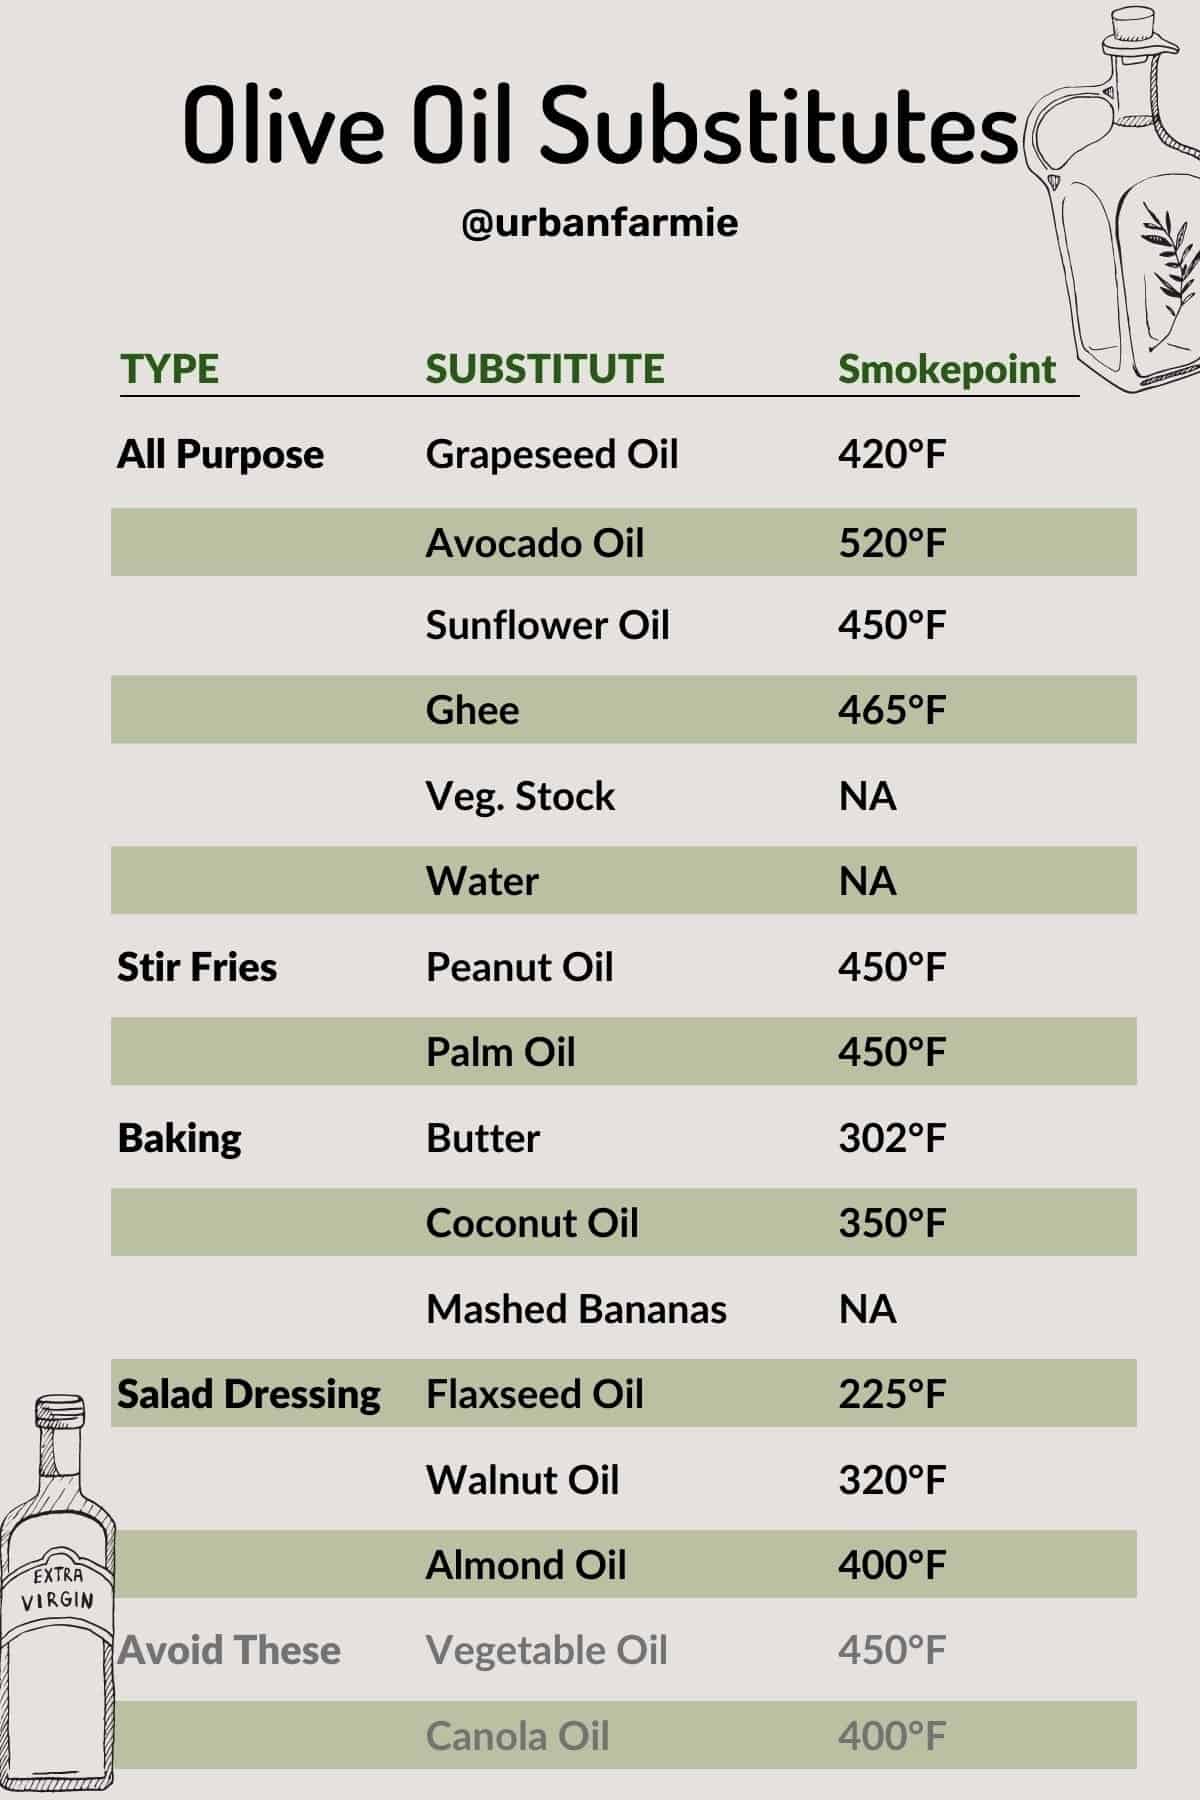 Infographic table showing all potential substitutes, grouped by uses and their smoke points